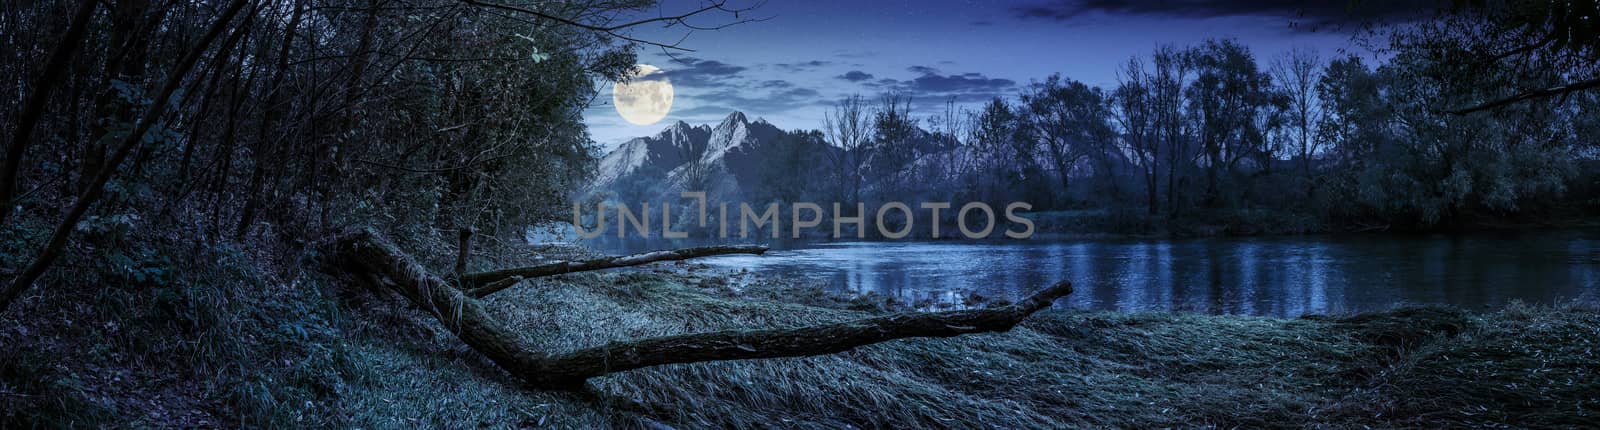 mountain river with fallen tree on the shore at night by Pellinni